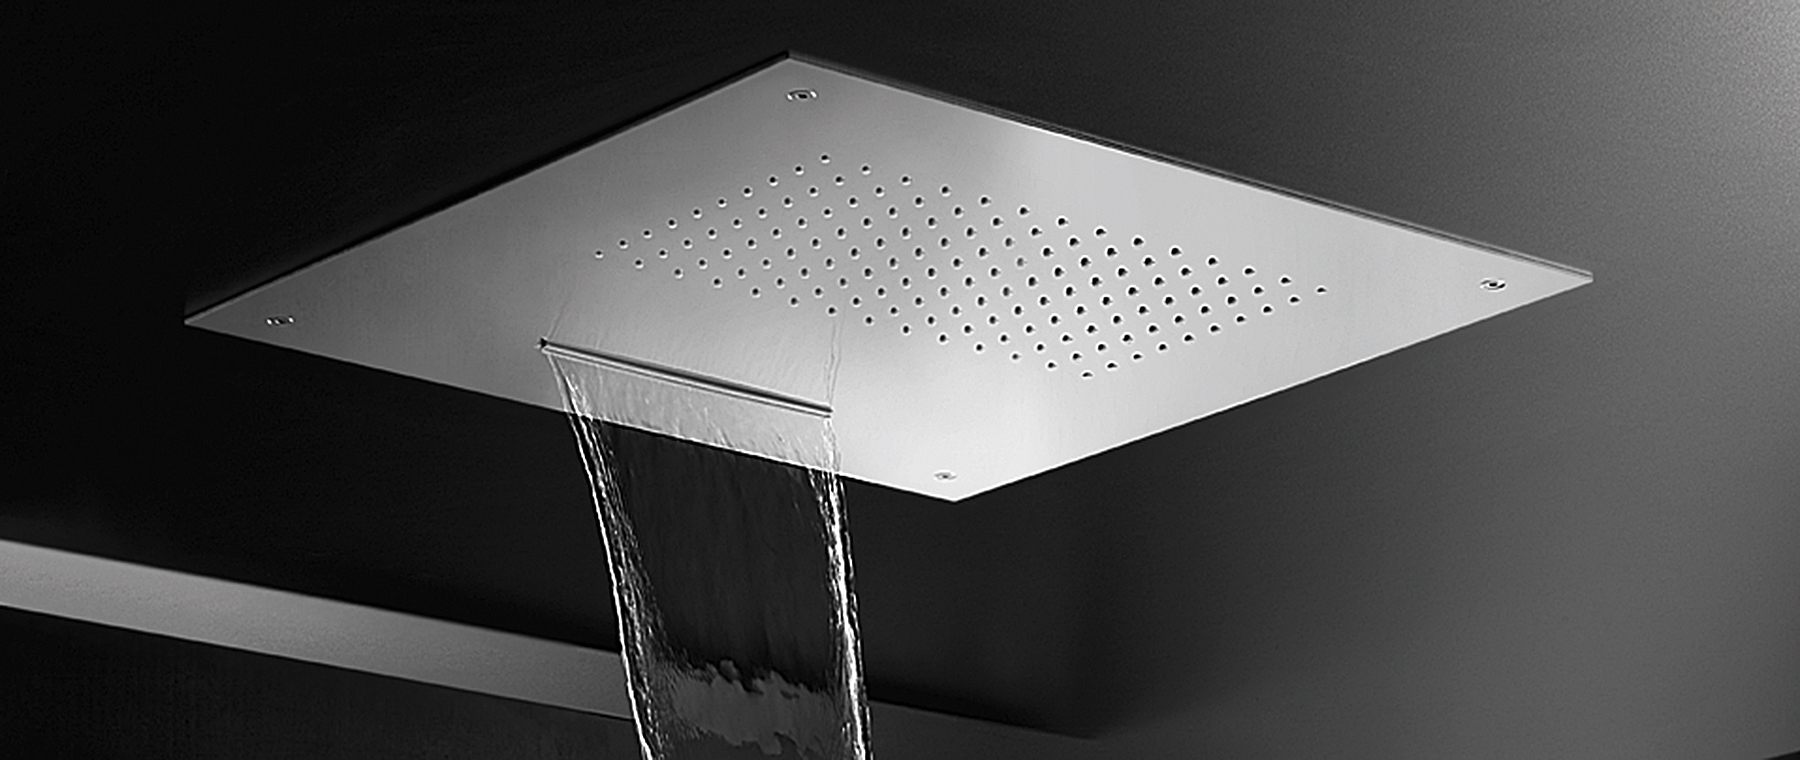 Shower heads & components